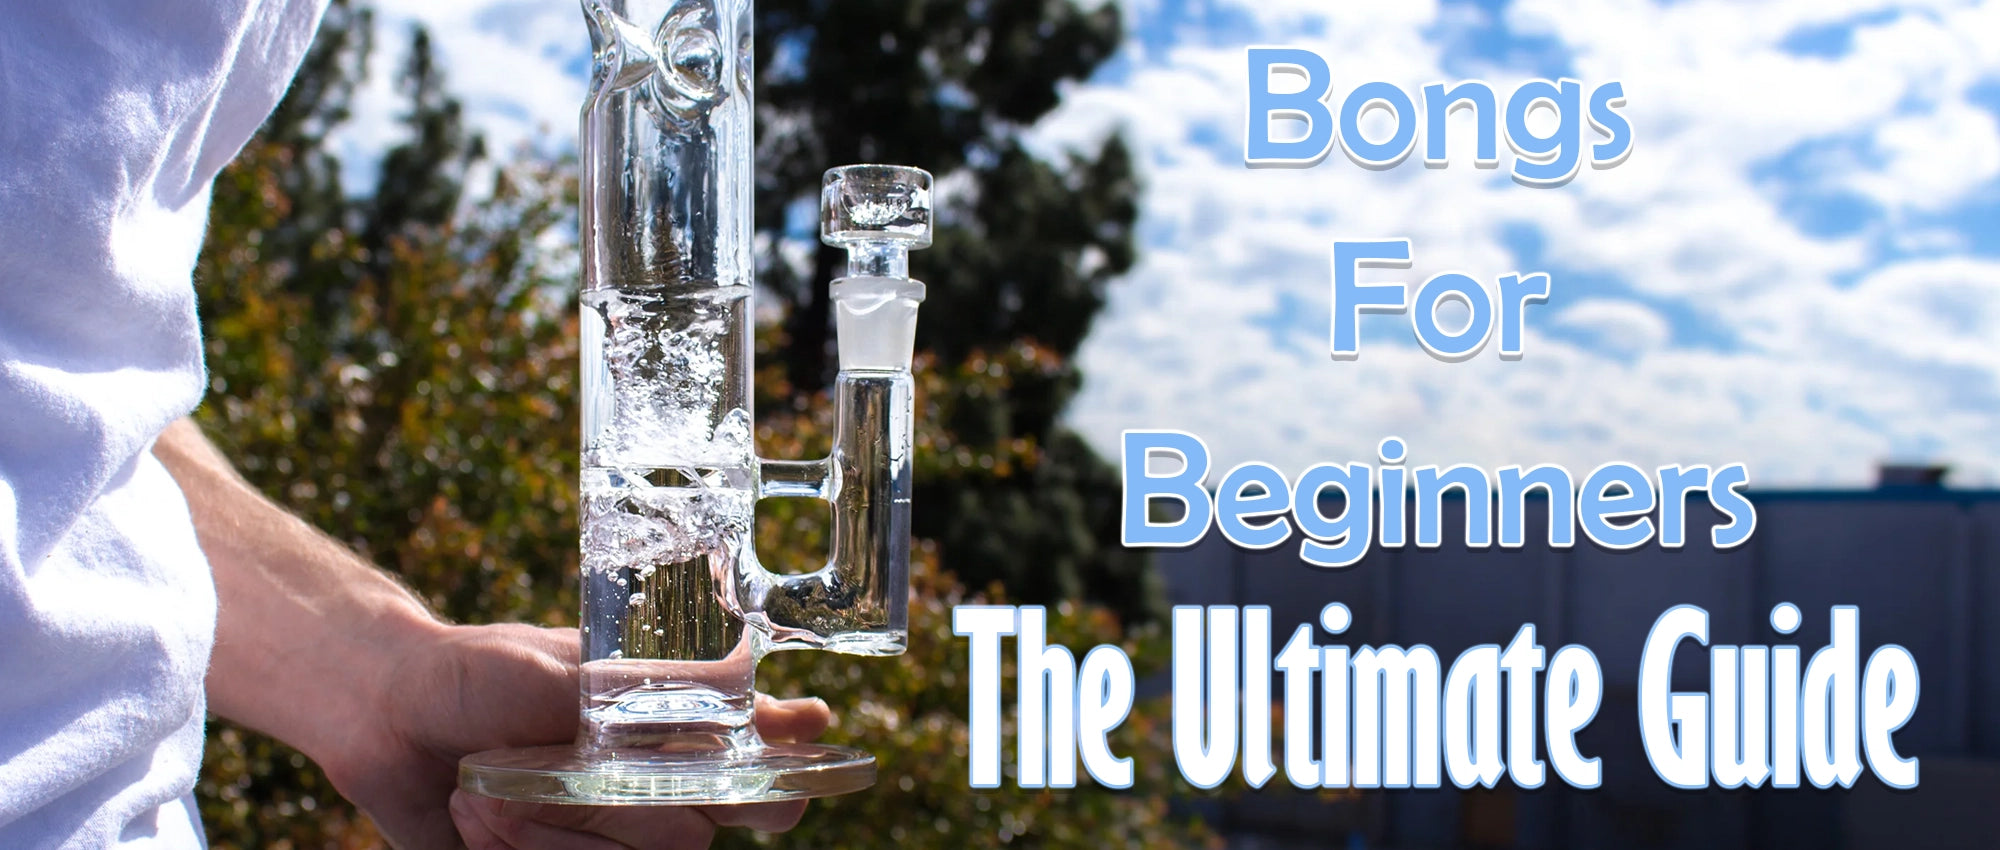 Bongs For Beginners The Ultimate Guide